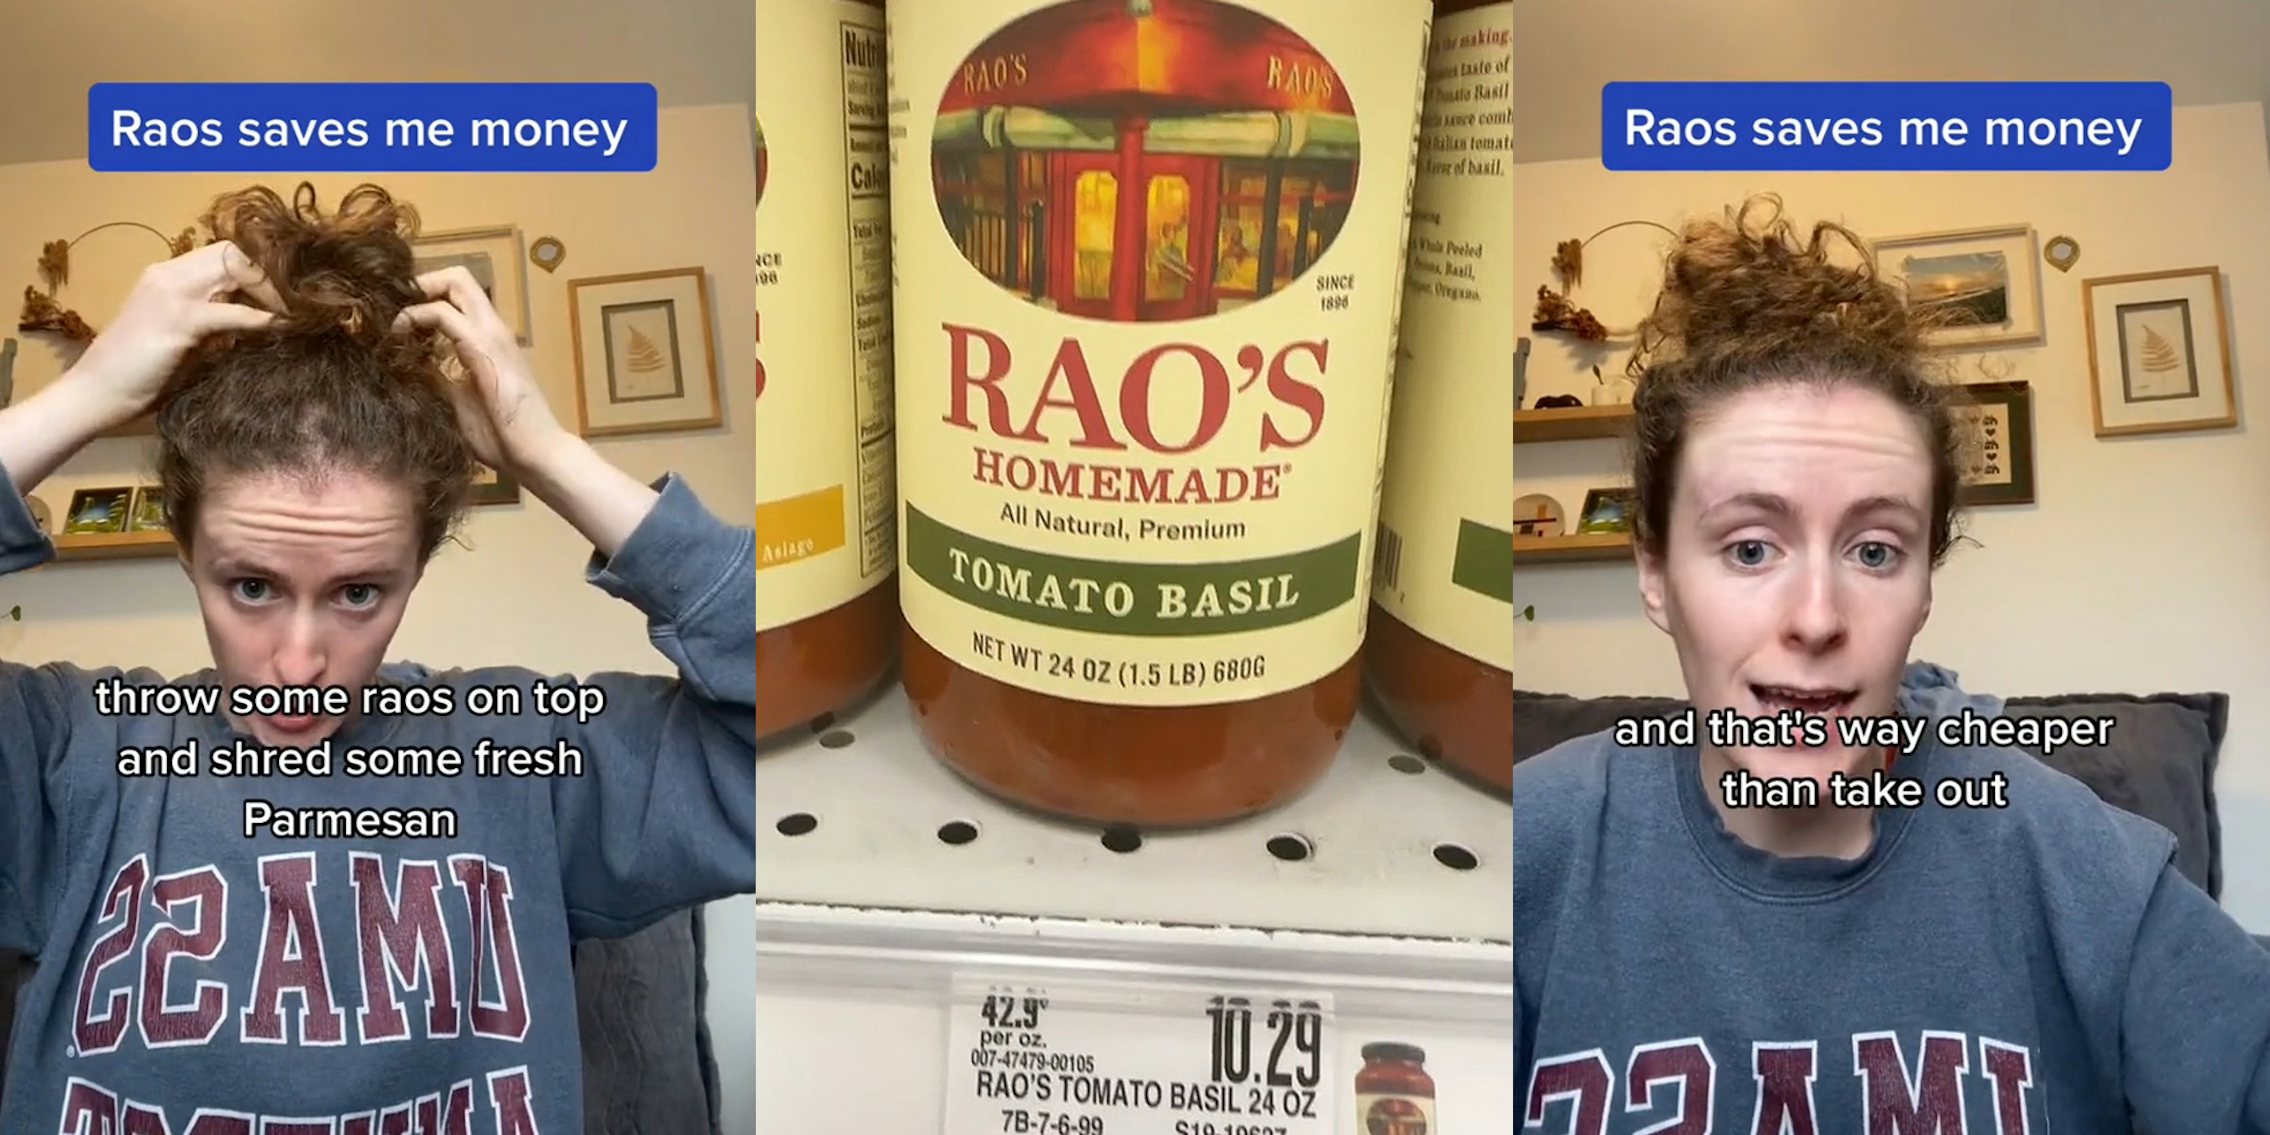 person speaking while putting hair up in bun with caption 'Raos saves me money' 'throw some raos on top and shred some fresh Parmesan' (l) Rao's sauce in can for $10.29 (c) person speaking on couch with caption 'Raos saves me money' 'and that's way cheaper than tale out' (r)